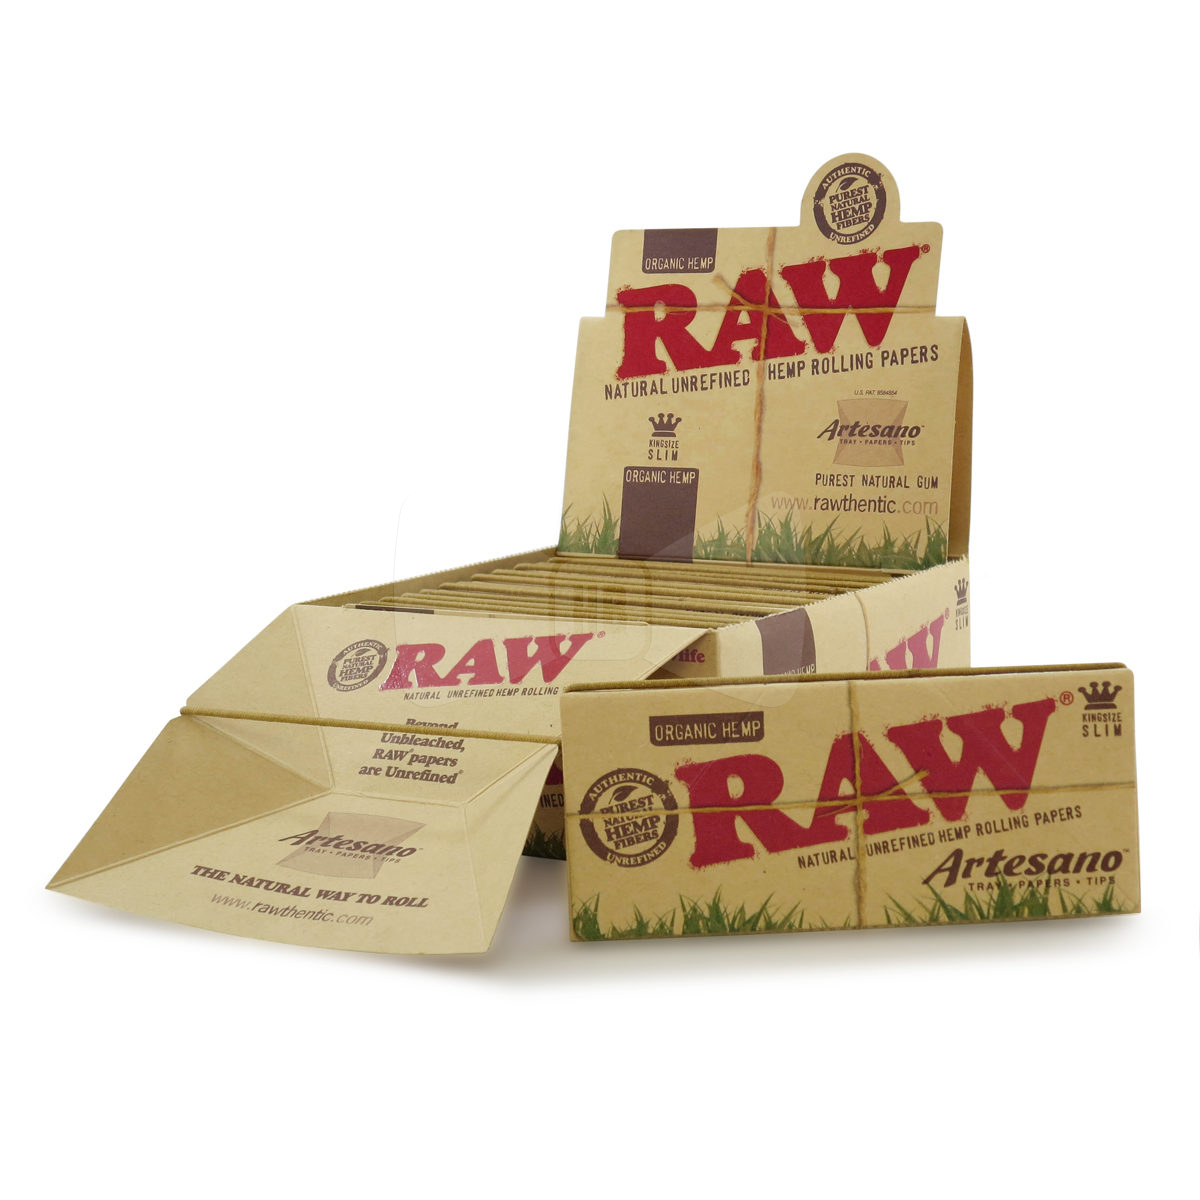 RAW Organic Artesano King Size Rolling Papers 1 Pack